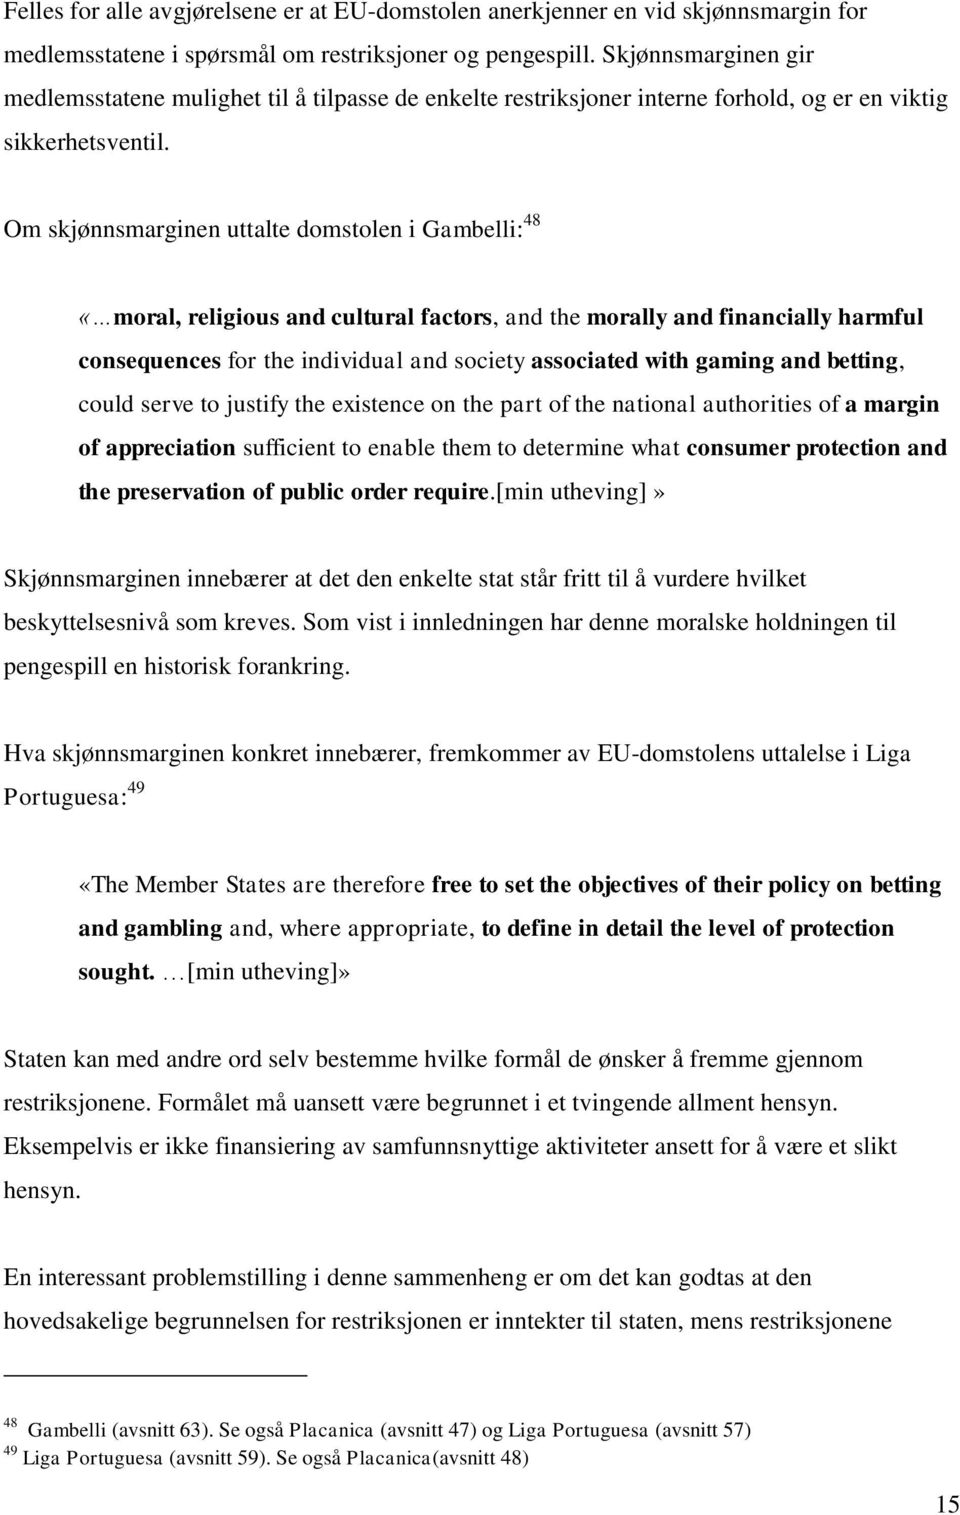 Om skjønnsmarginen uttalte domstolen i Gambelli: 48 «moral, religious and cultural factors, and the morally and financially harmful consequences for the individual and society associated with gaming